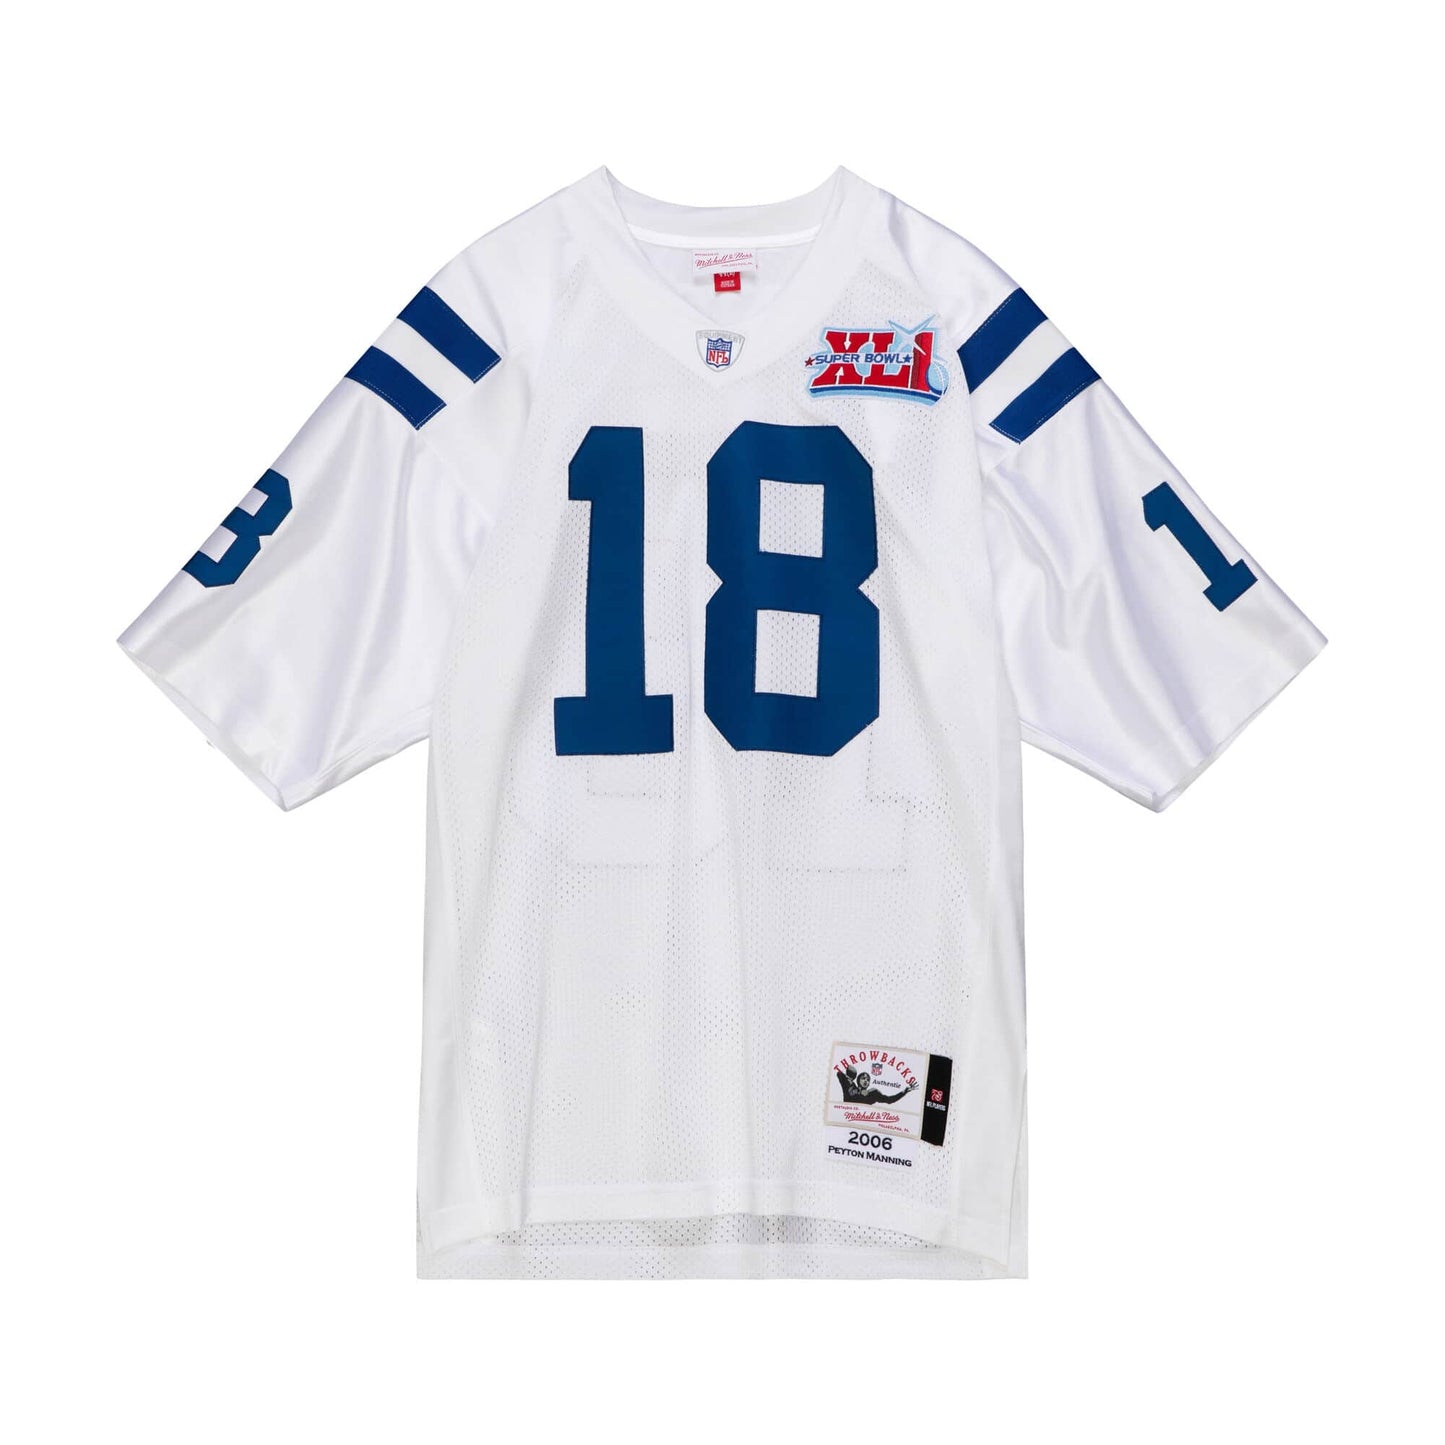 Authentic Peyton Manning Indianapolis Colts 2006 Jersey